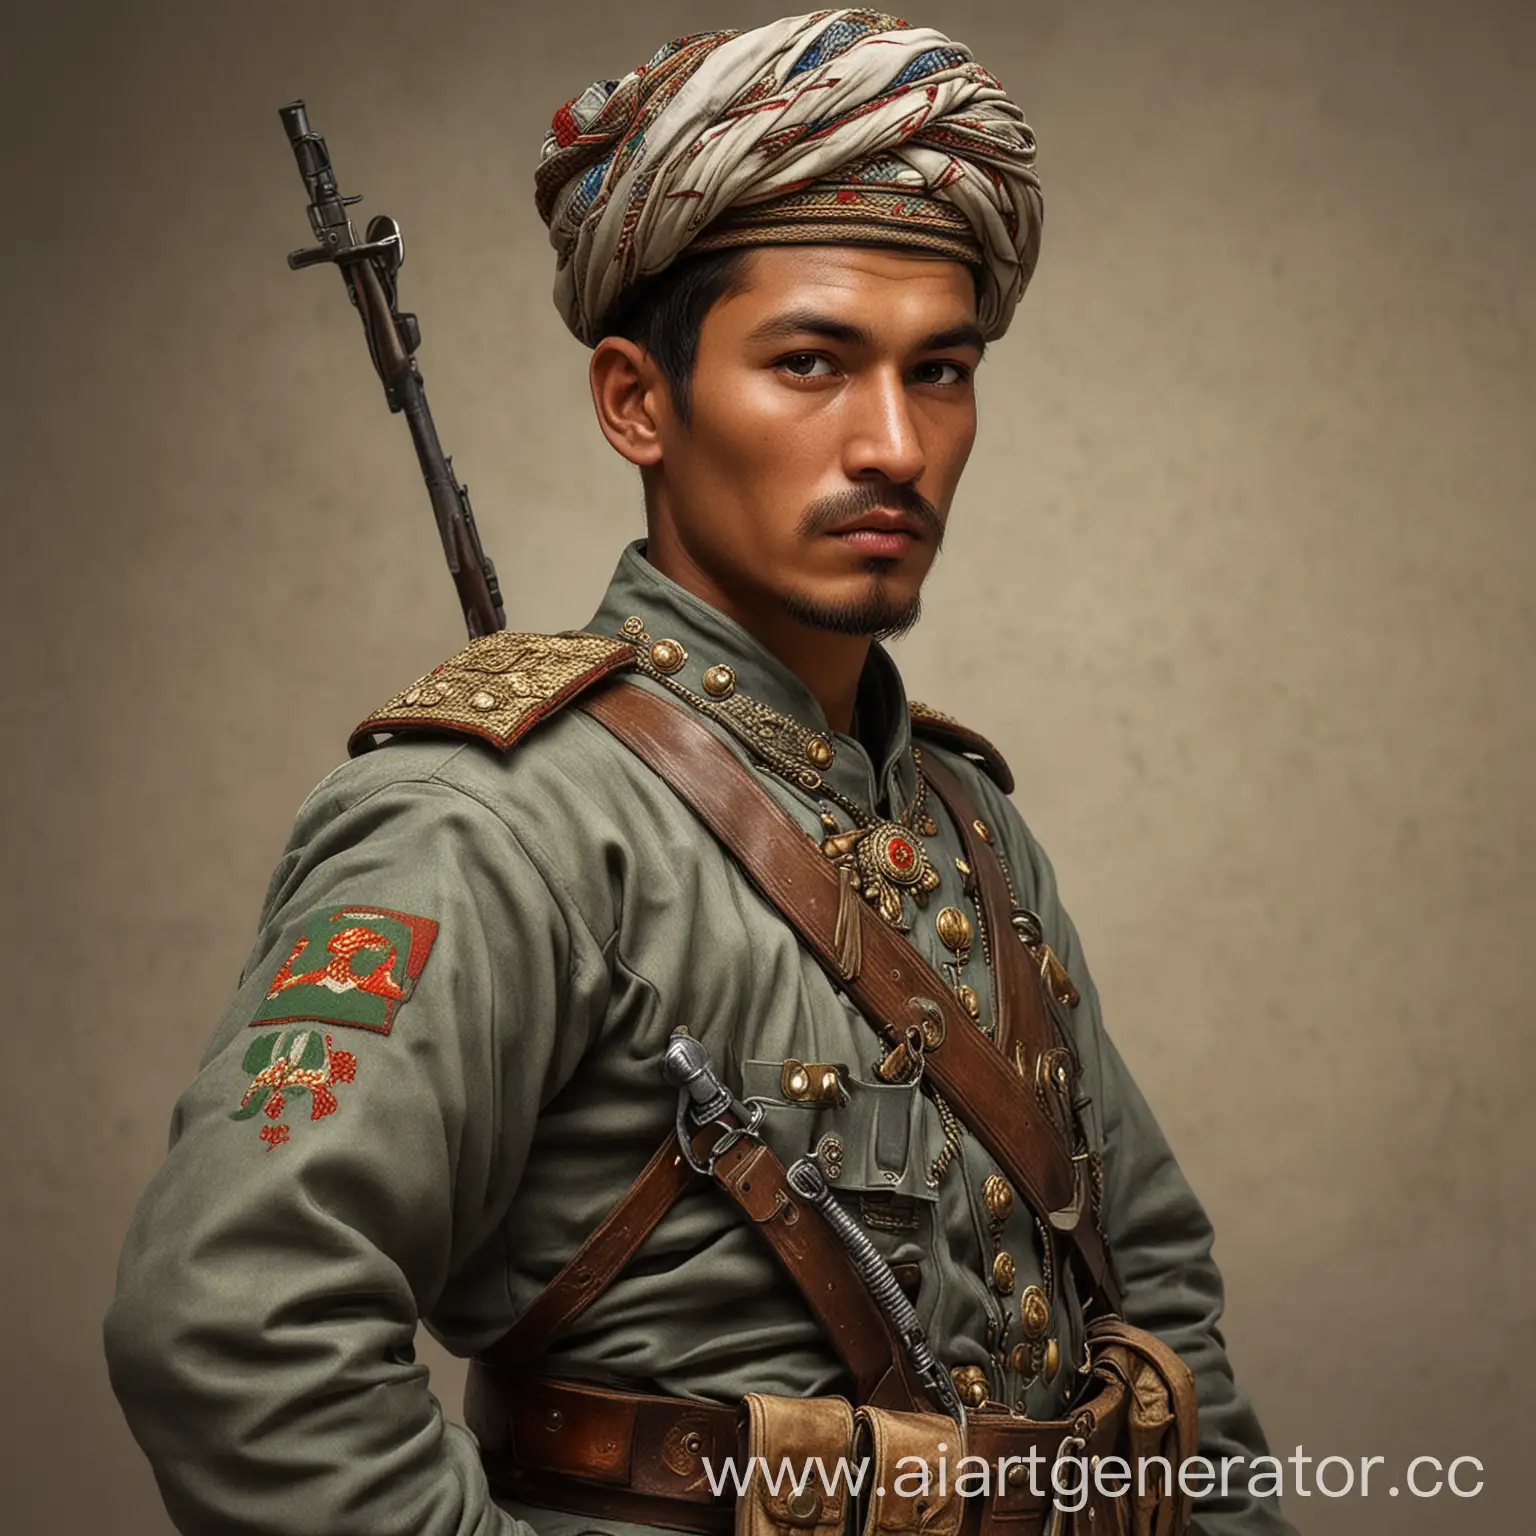 Uzbek-Soldier-of-the-Year-1900-Proud-Warrior-in-Traditional-Garb